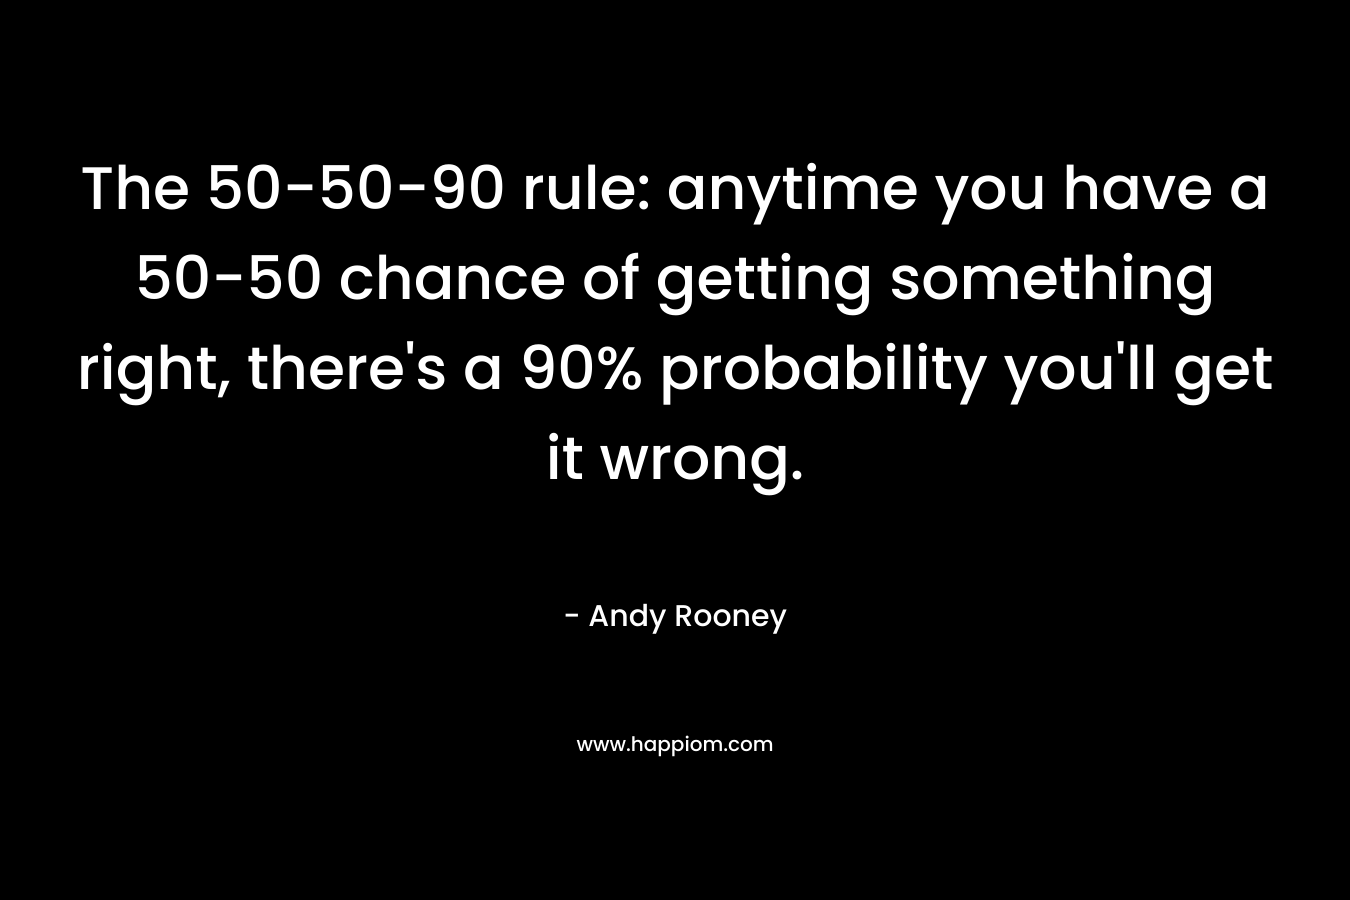 The 50-50-90 rule: anytime you have a 50-50 chance of getting something right, there’s a 90% probability you’ll get it wrong. – Andy Rooney